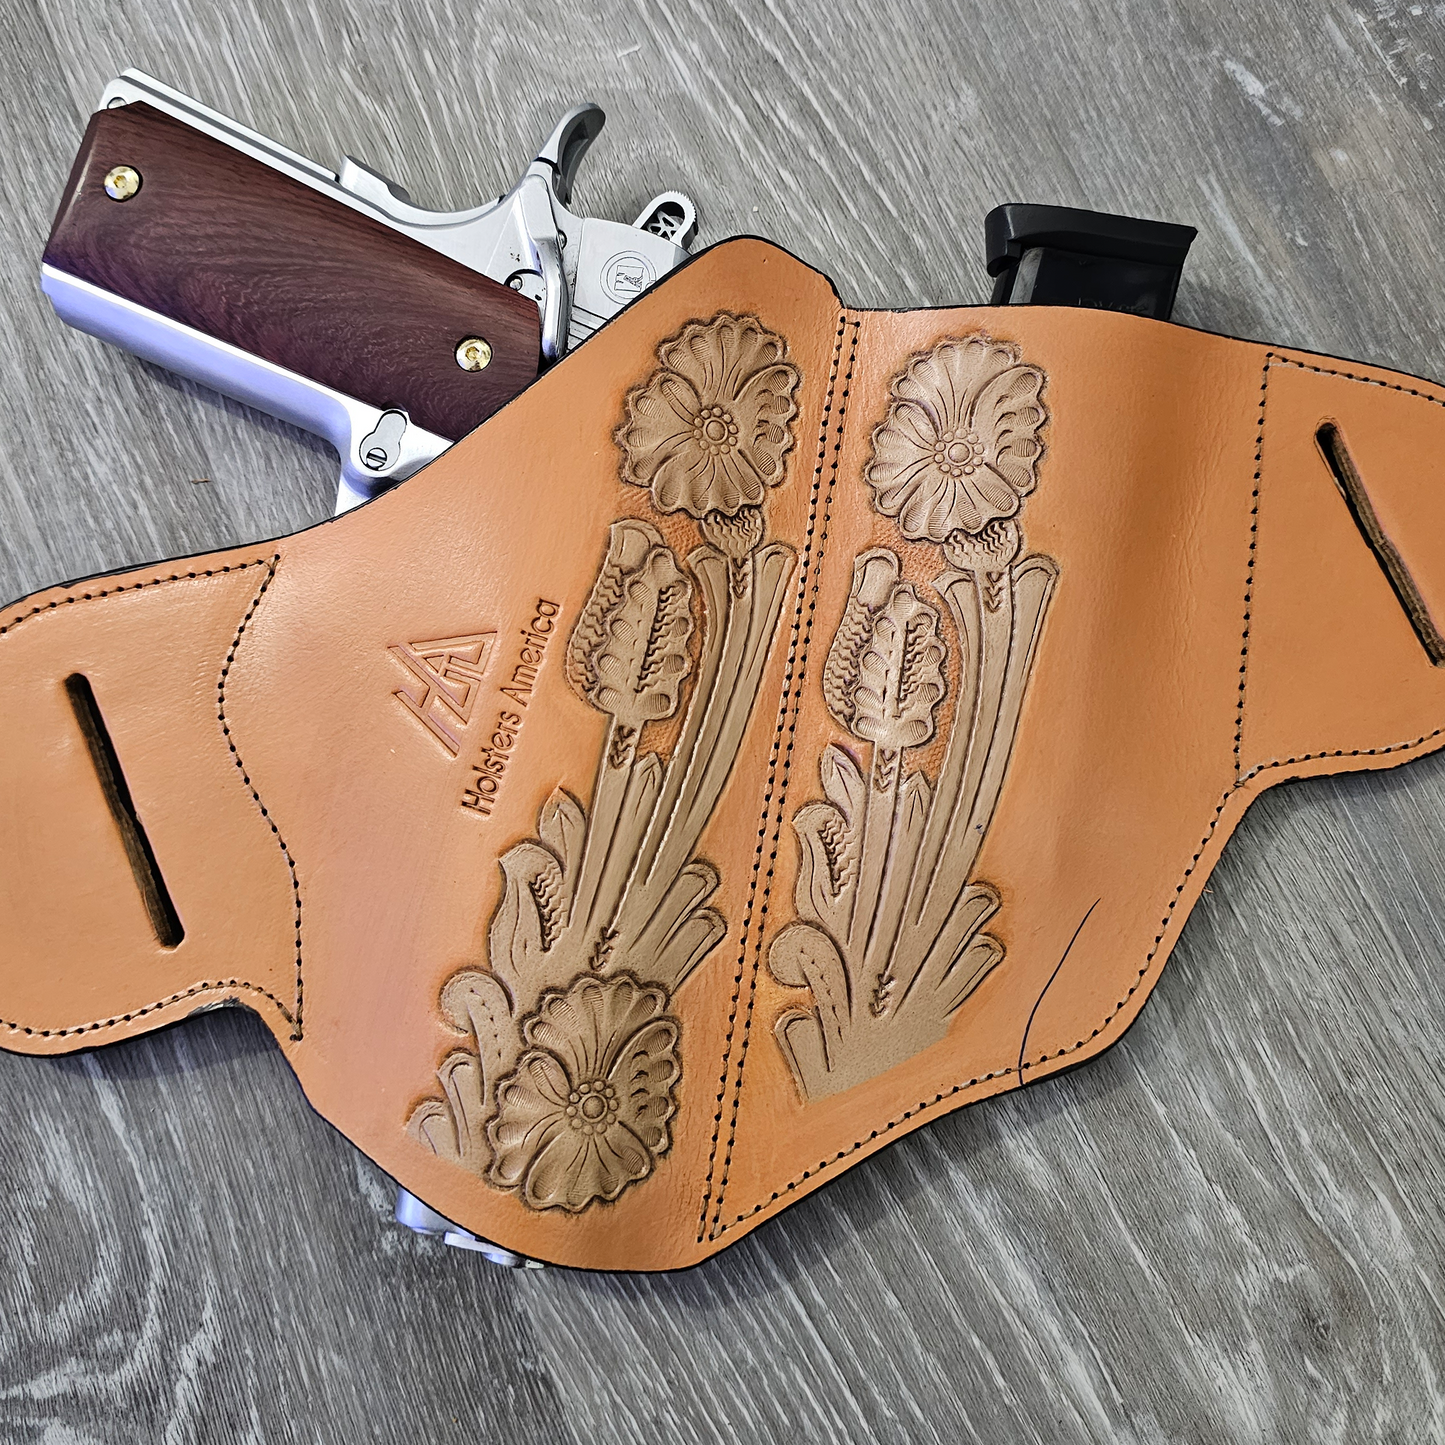 Scroll Design Leather Holsters